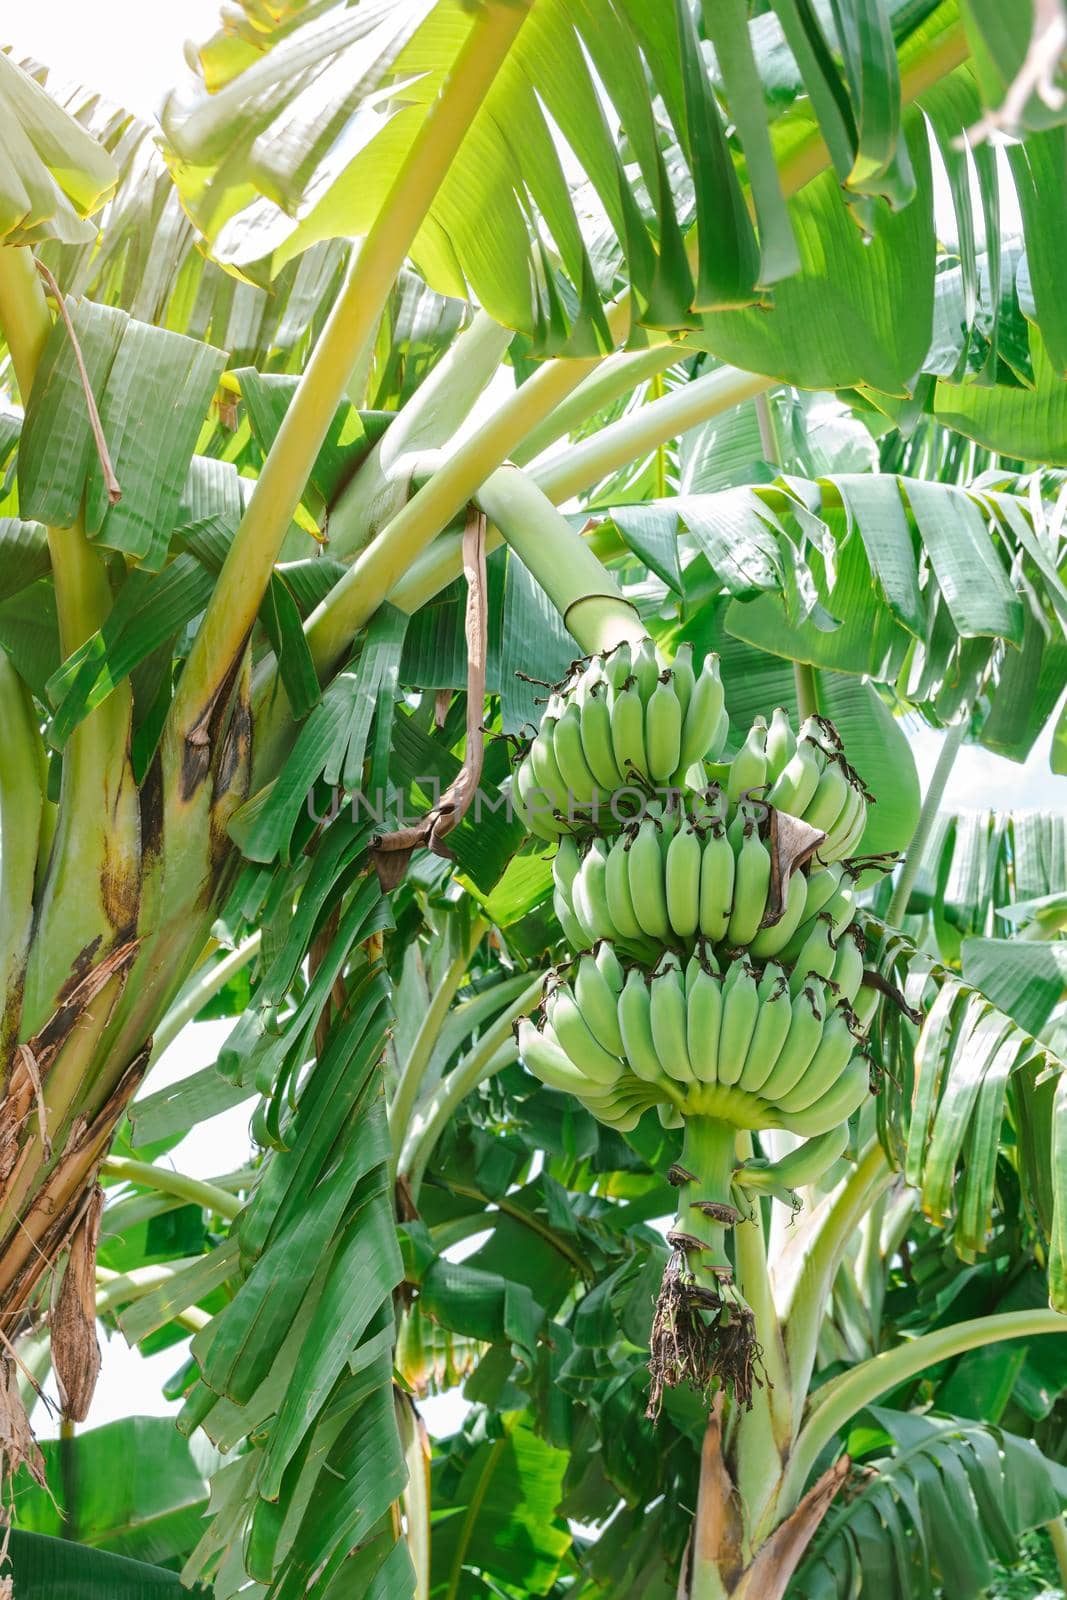 Green unripe bananas that are gathered on the same branch. by wattanaphob